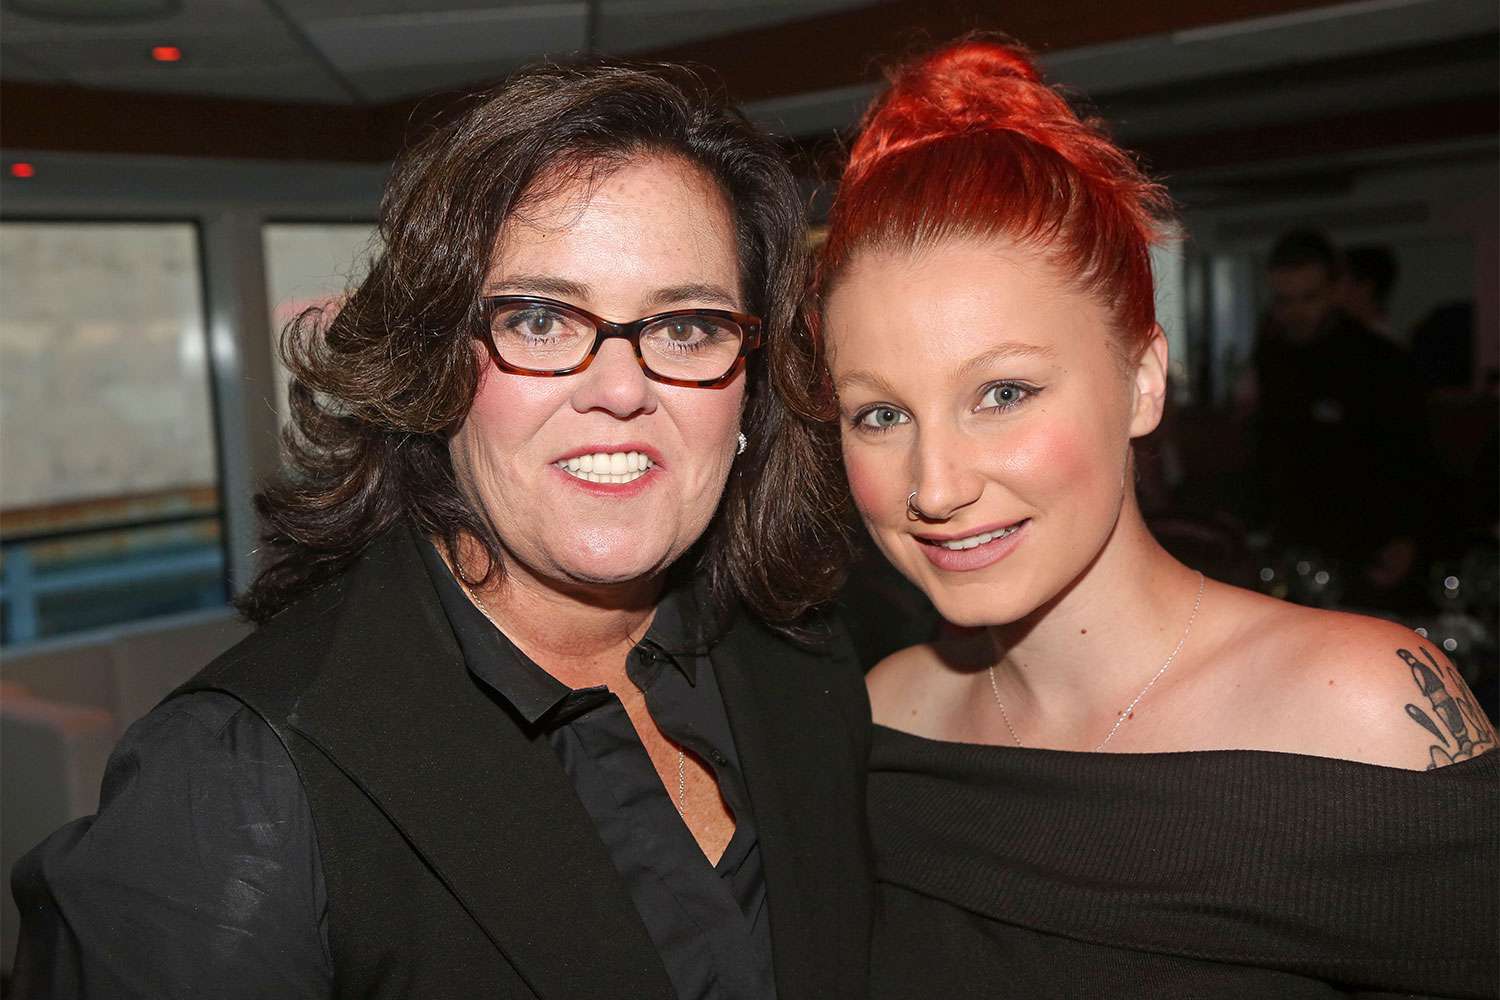 Rosie O'Donnell and Chelsea Belle O'Donnell